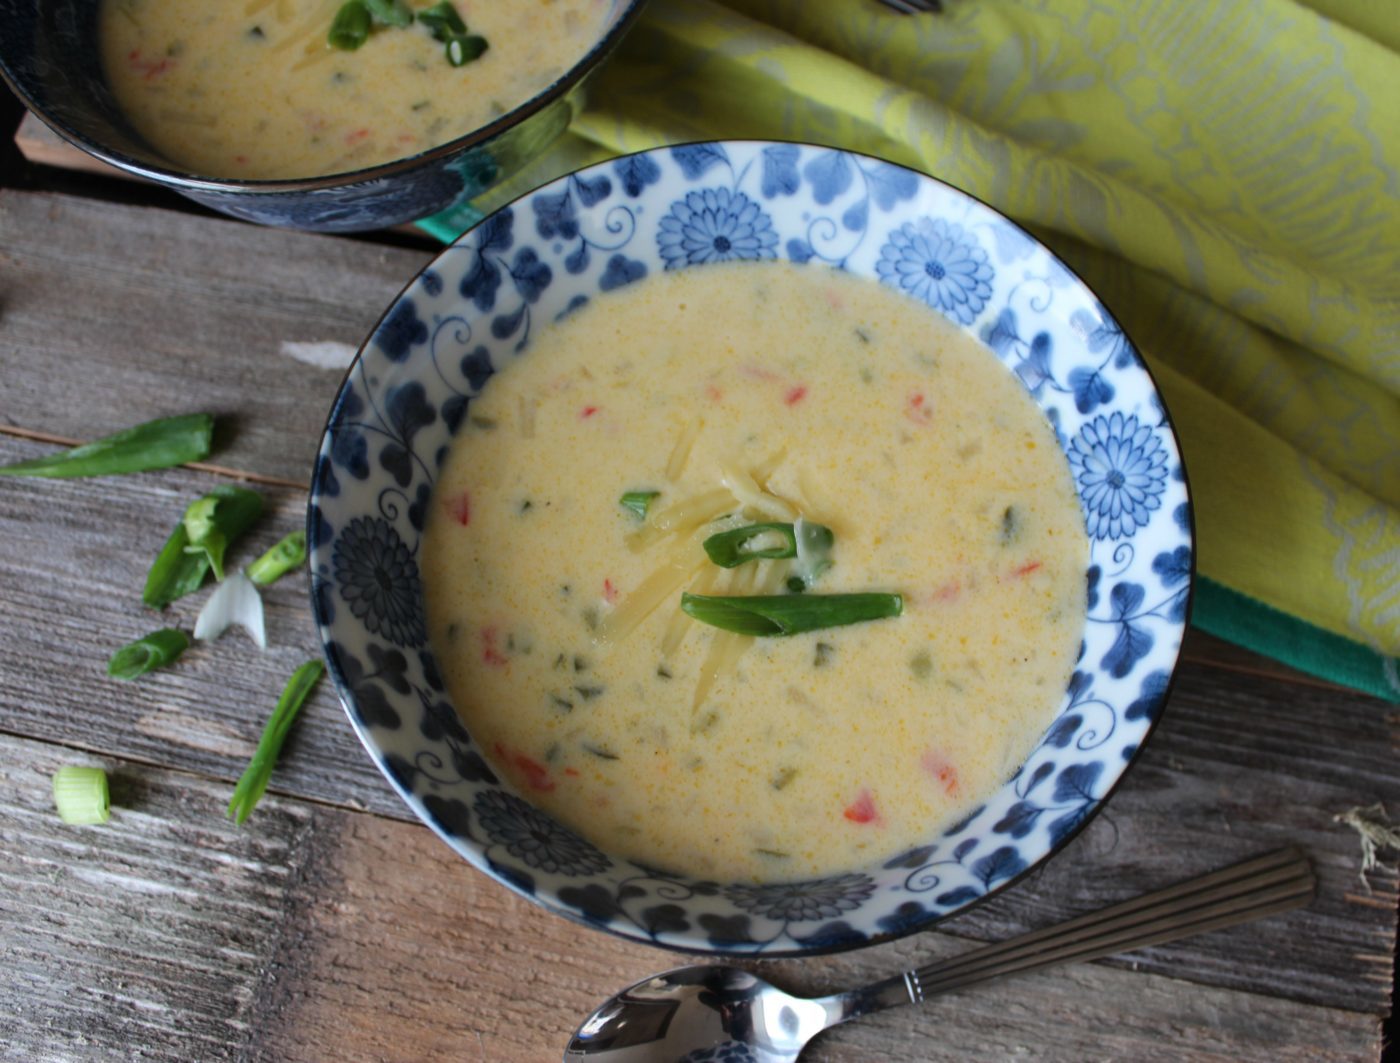 Potatos in soup or chowder form is always a good idea.